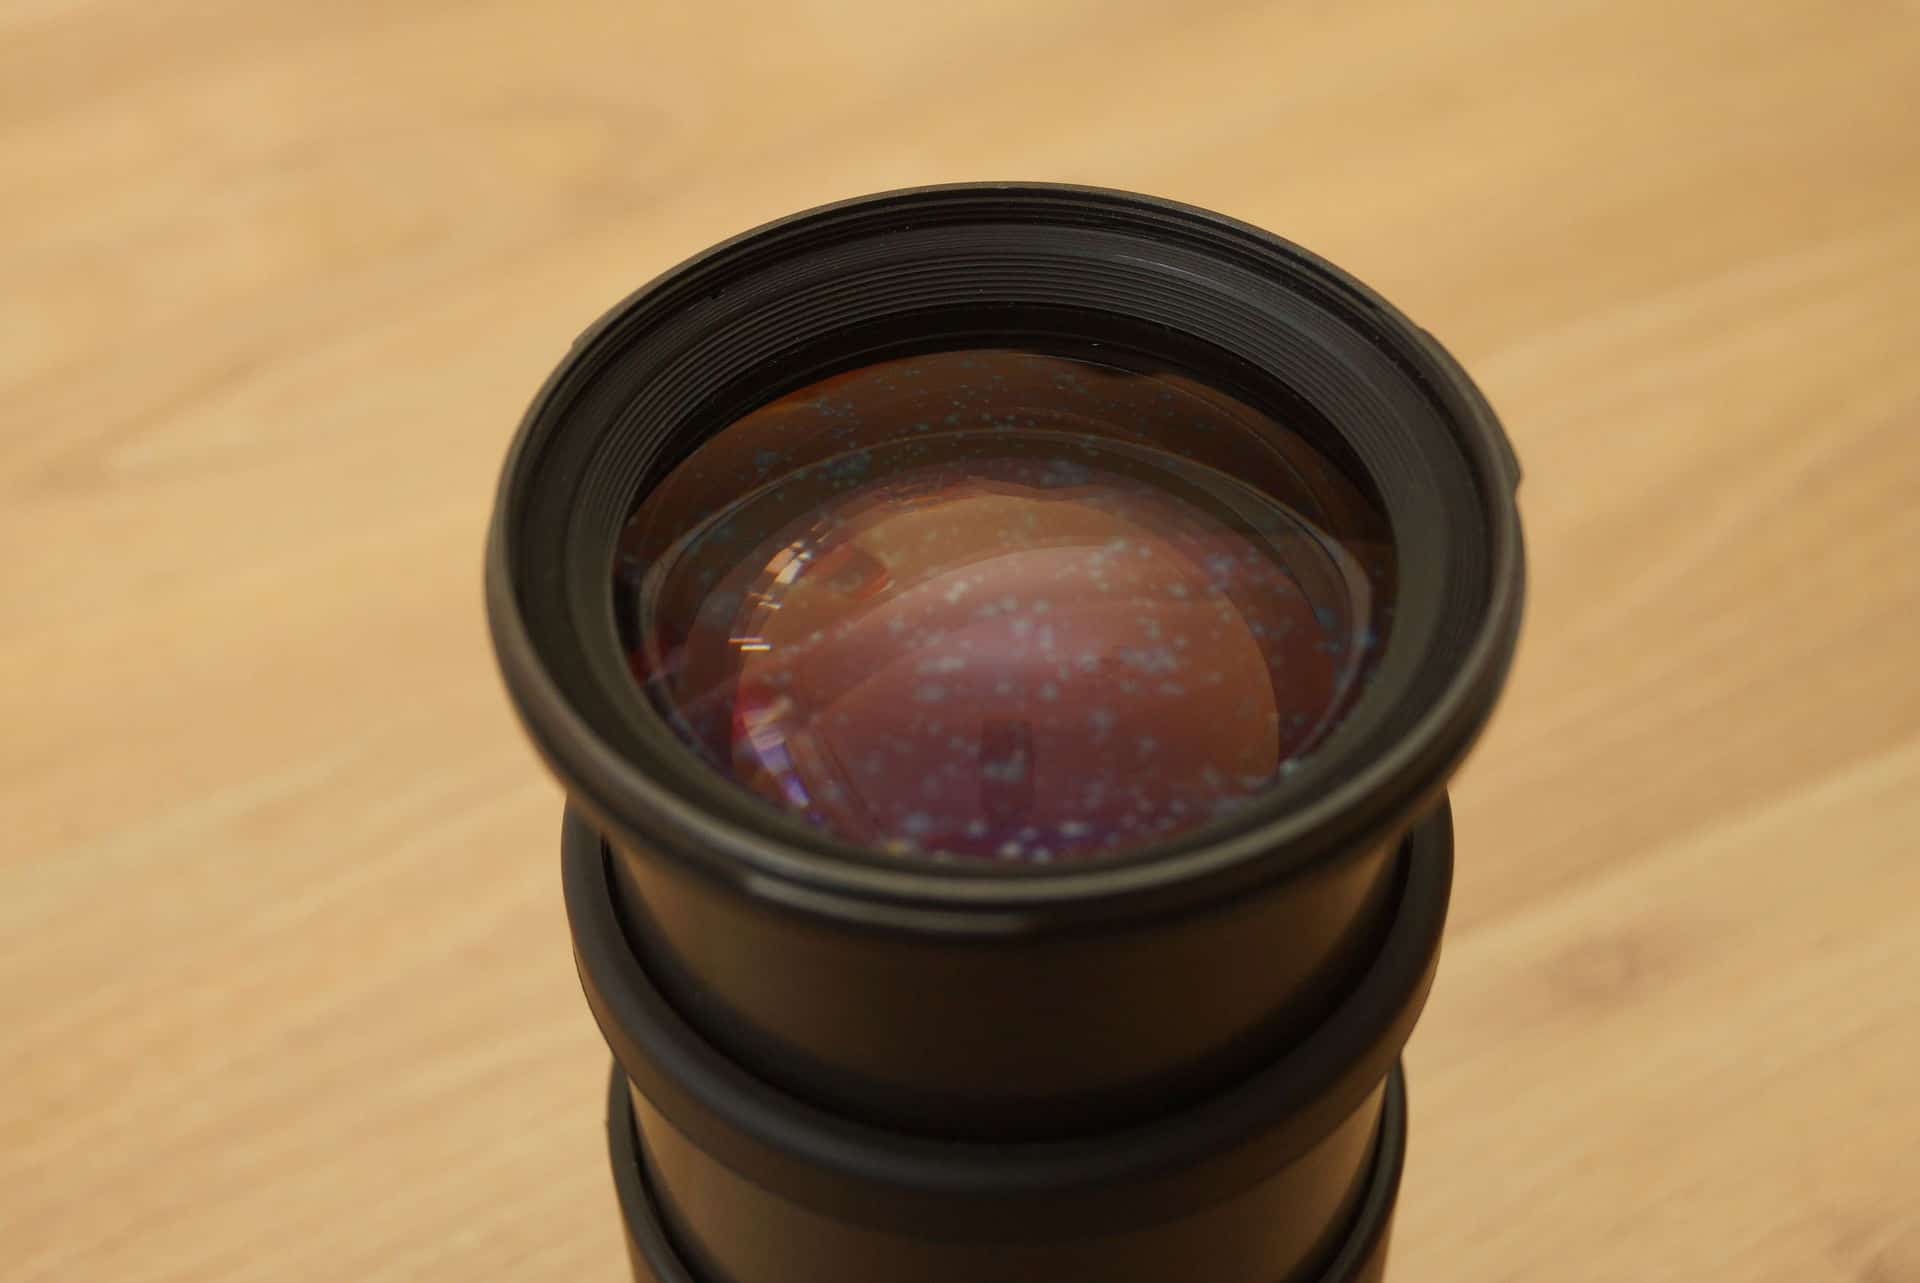 How to Tell If a Lens Coating Is Damaged?